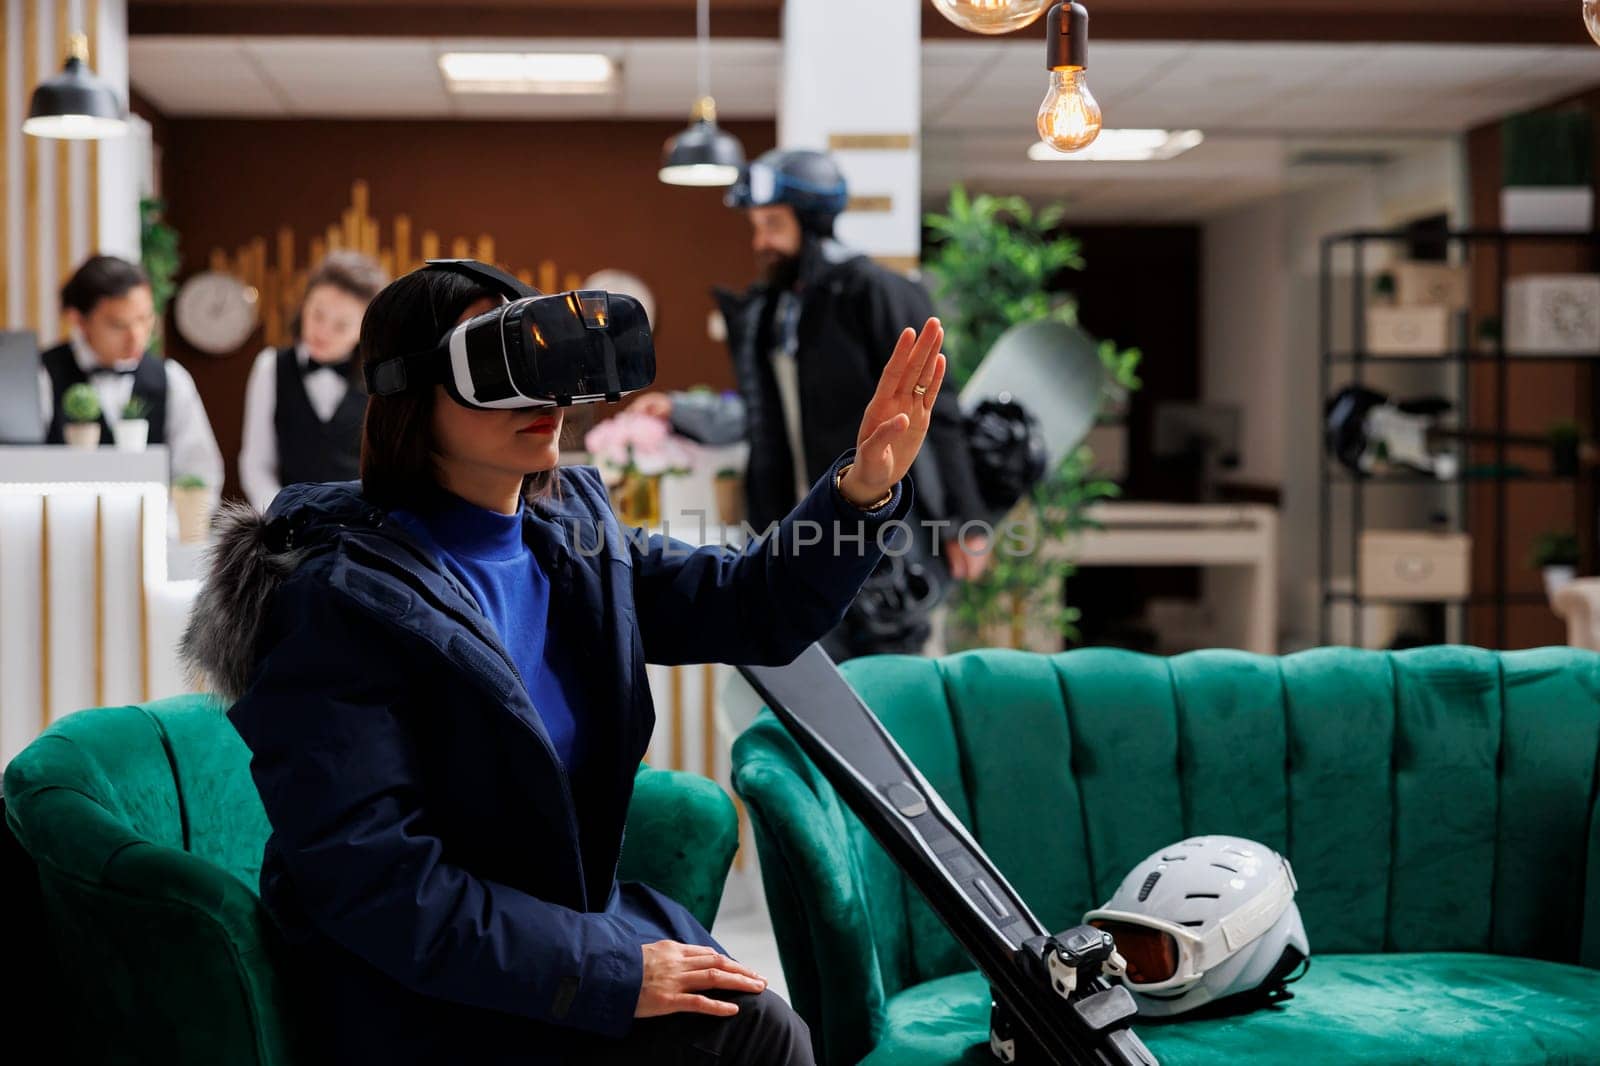 Asian woman with skiing gear engages with virtual reality device in lounge area preparing for wintersports activity. With digital VR glasses, ski resort guest balances relaxation and exploration.